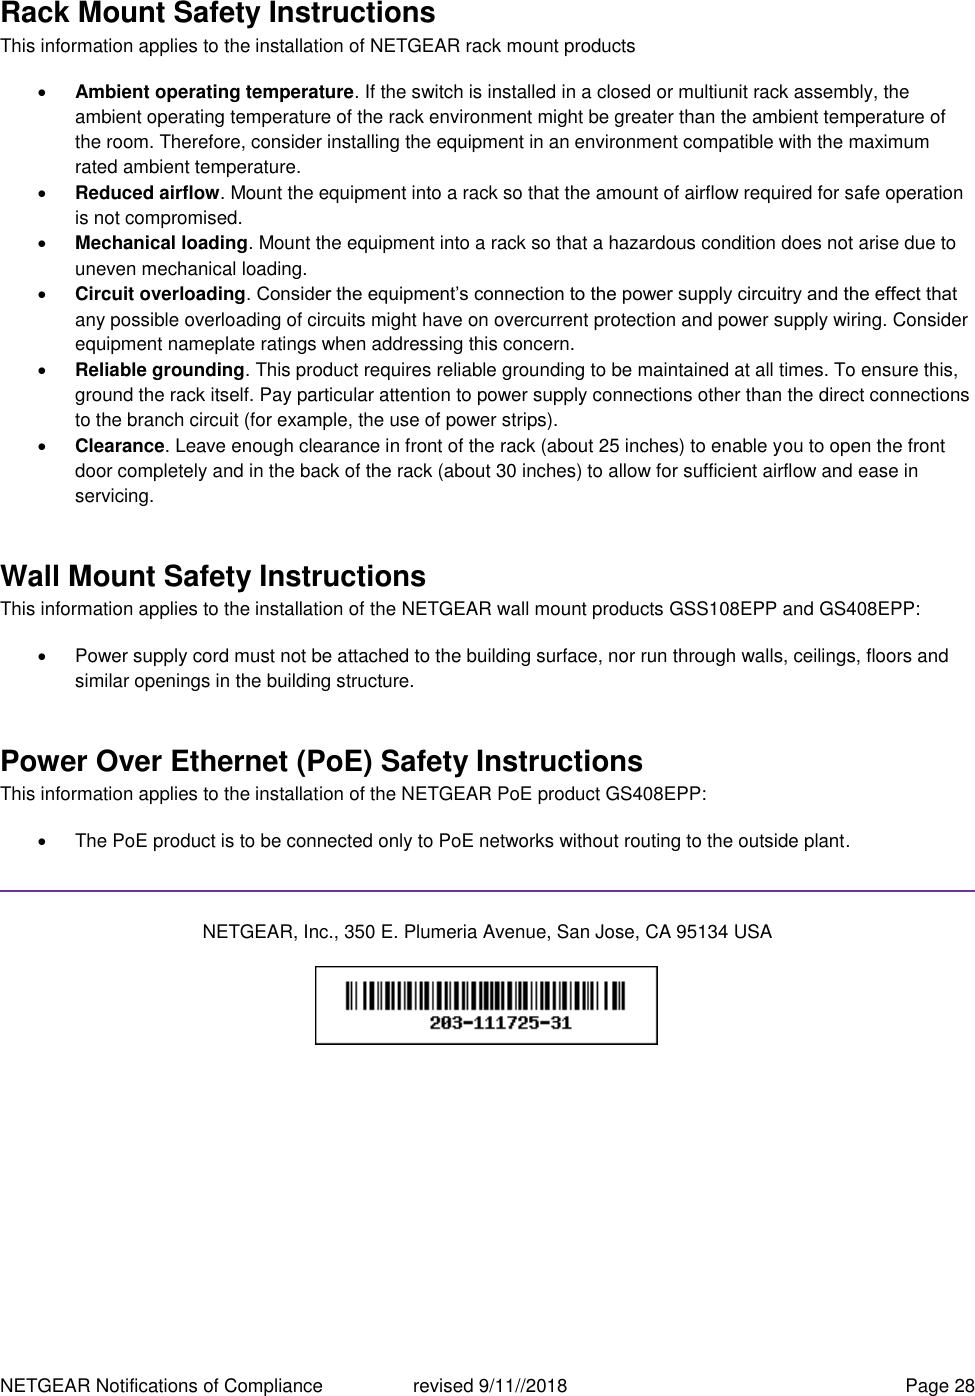 NETGEAR Notifications of Compliance    revised 9/11//2018  Page 28 Rack Mount Safety Instructions This information applies to the installation of NETGEAR rack mount products  Ambient operating temperature. If the switch is installed in a closed or multiunit rack assembly, the ambient operating temperature of the rack environment might be greater than the ambient temperature of the room. Therefore, consider installing the equipment in an environment compatible with the maximum rated ambient temperature.  Reduced airflow. Mount the equipment into a rack so that the amount of airflow required for safe operation is not compromised.  Mechanical loading. Mount the equipment into a rack so that a hazardous condition does not arise due to uneven mechanical loading.  Circuit overloading. Consider the equipment’s connection to the power supply circuitry and the effect that any possible overloading of circuits might have on overcurrent protection and power supply wiring. Consider equipment nameplate ratings when addressing this concern.  Reliable grounding. This product requires reliable grounding to be maintained at all times. To ensure this, ground the rack itself. Pay particular attention to power supply connections other than the direct connections to the branch circuit (for example, the use of power strips).  Clearance. Leave enough clearance in front of the rack (about 25 inches) to enable you to open the front door completely and in the back of the rack (about 30 inches) to allow for sufficient airflow and ease in servicing. Wall Mount Safety Instructions This information applies to the installation of the NETGEAR wall mount products GSS108EPP and GS408EPP:   Power supply cord must not be attached to the building surface, nor run through walls, ceilings, floors and similar openings in the building structure. Power Over Ethernet (PoE) Safety Instructions This information applies to the installation of the NETGEAR PoE product GS408EPP:   The PoE product is to be connected only to PoE networks without routing to the outside plant.  NETGEAR, Inc., 350 E. Plumeria Avenue, San Jose, CA 95134 USA    